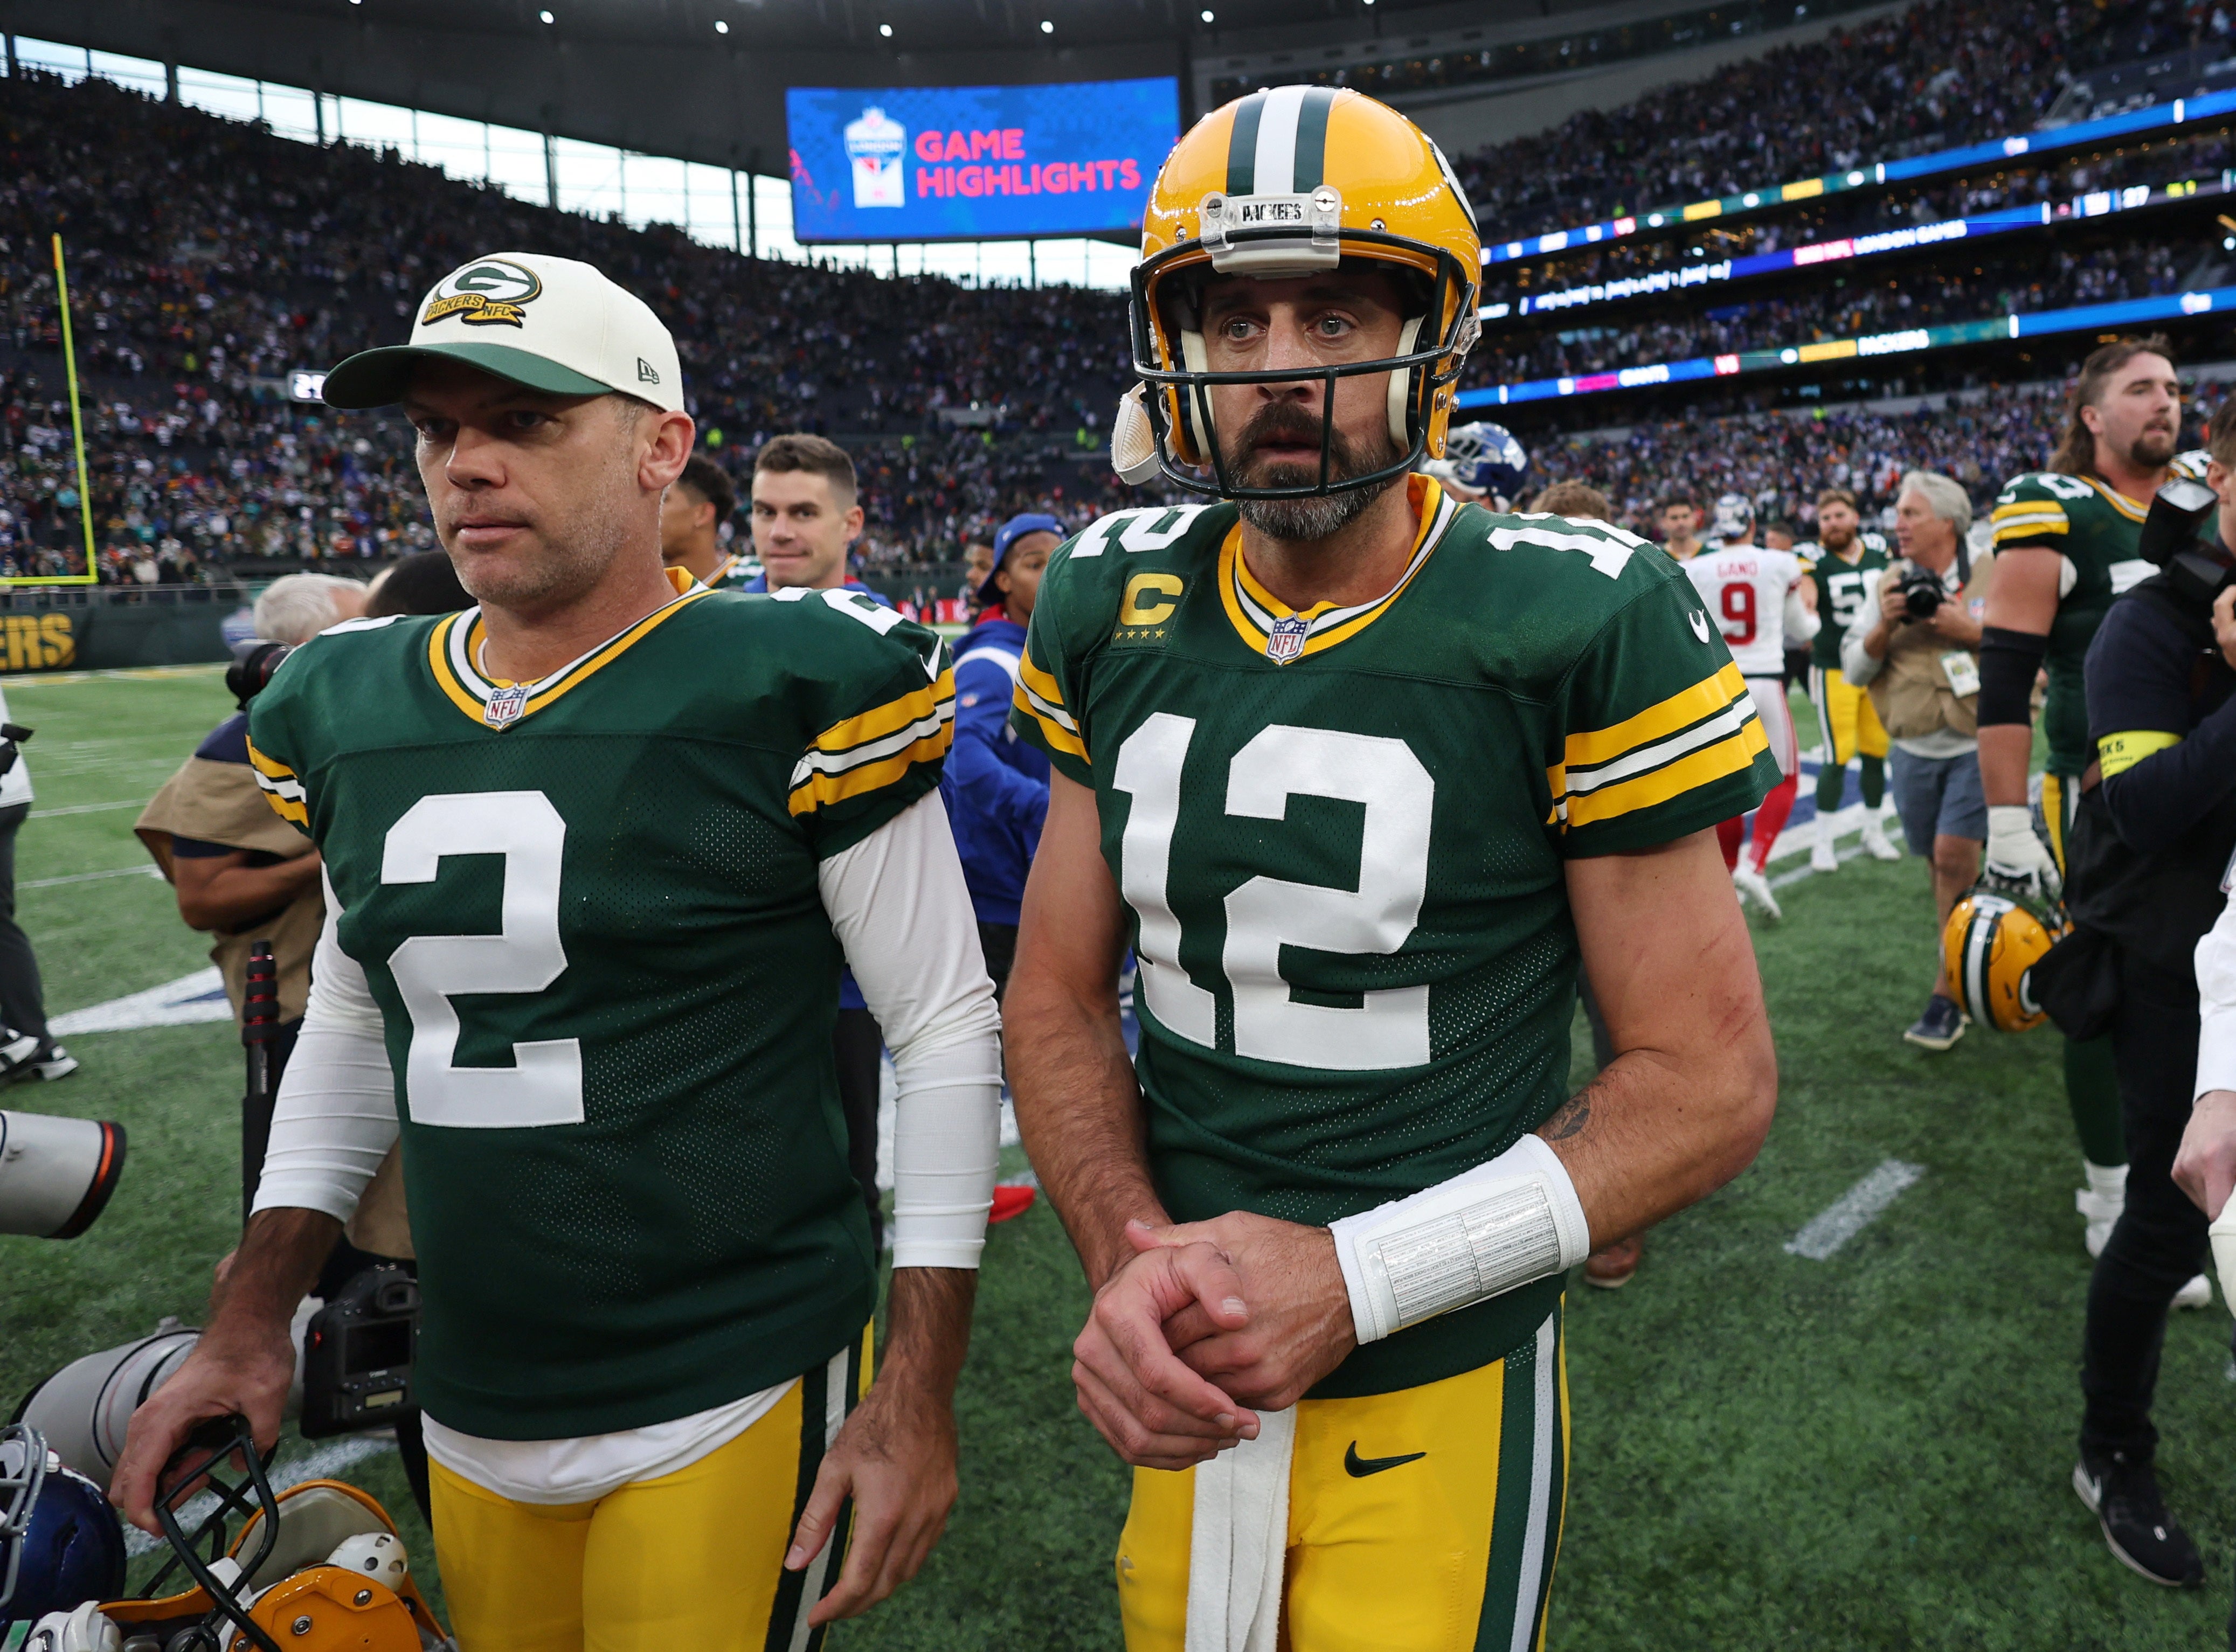 Green Bay Packers to play NFL home game in London for first time